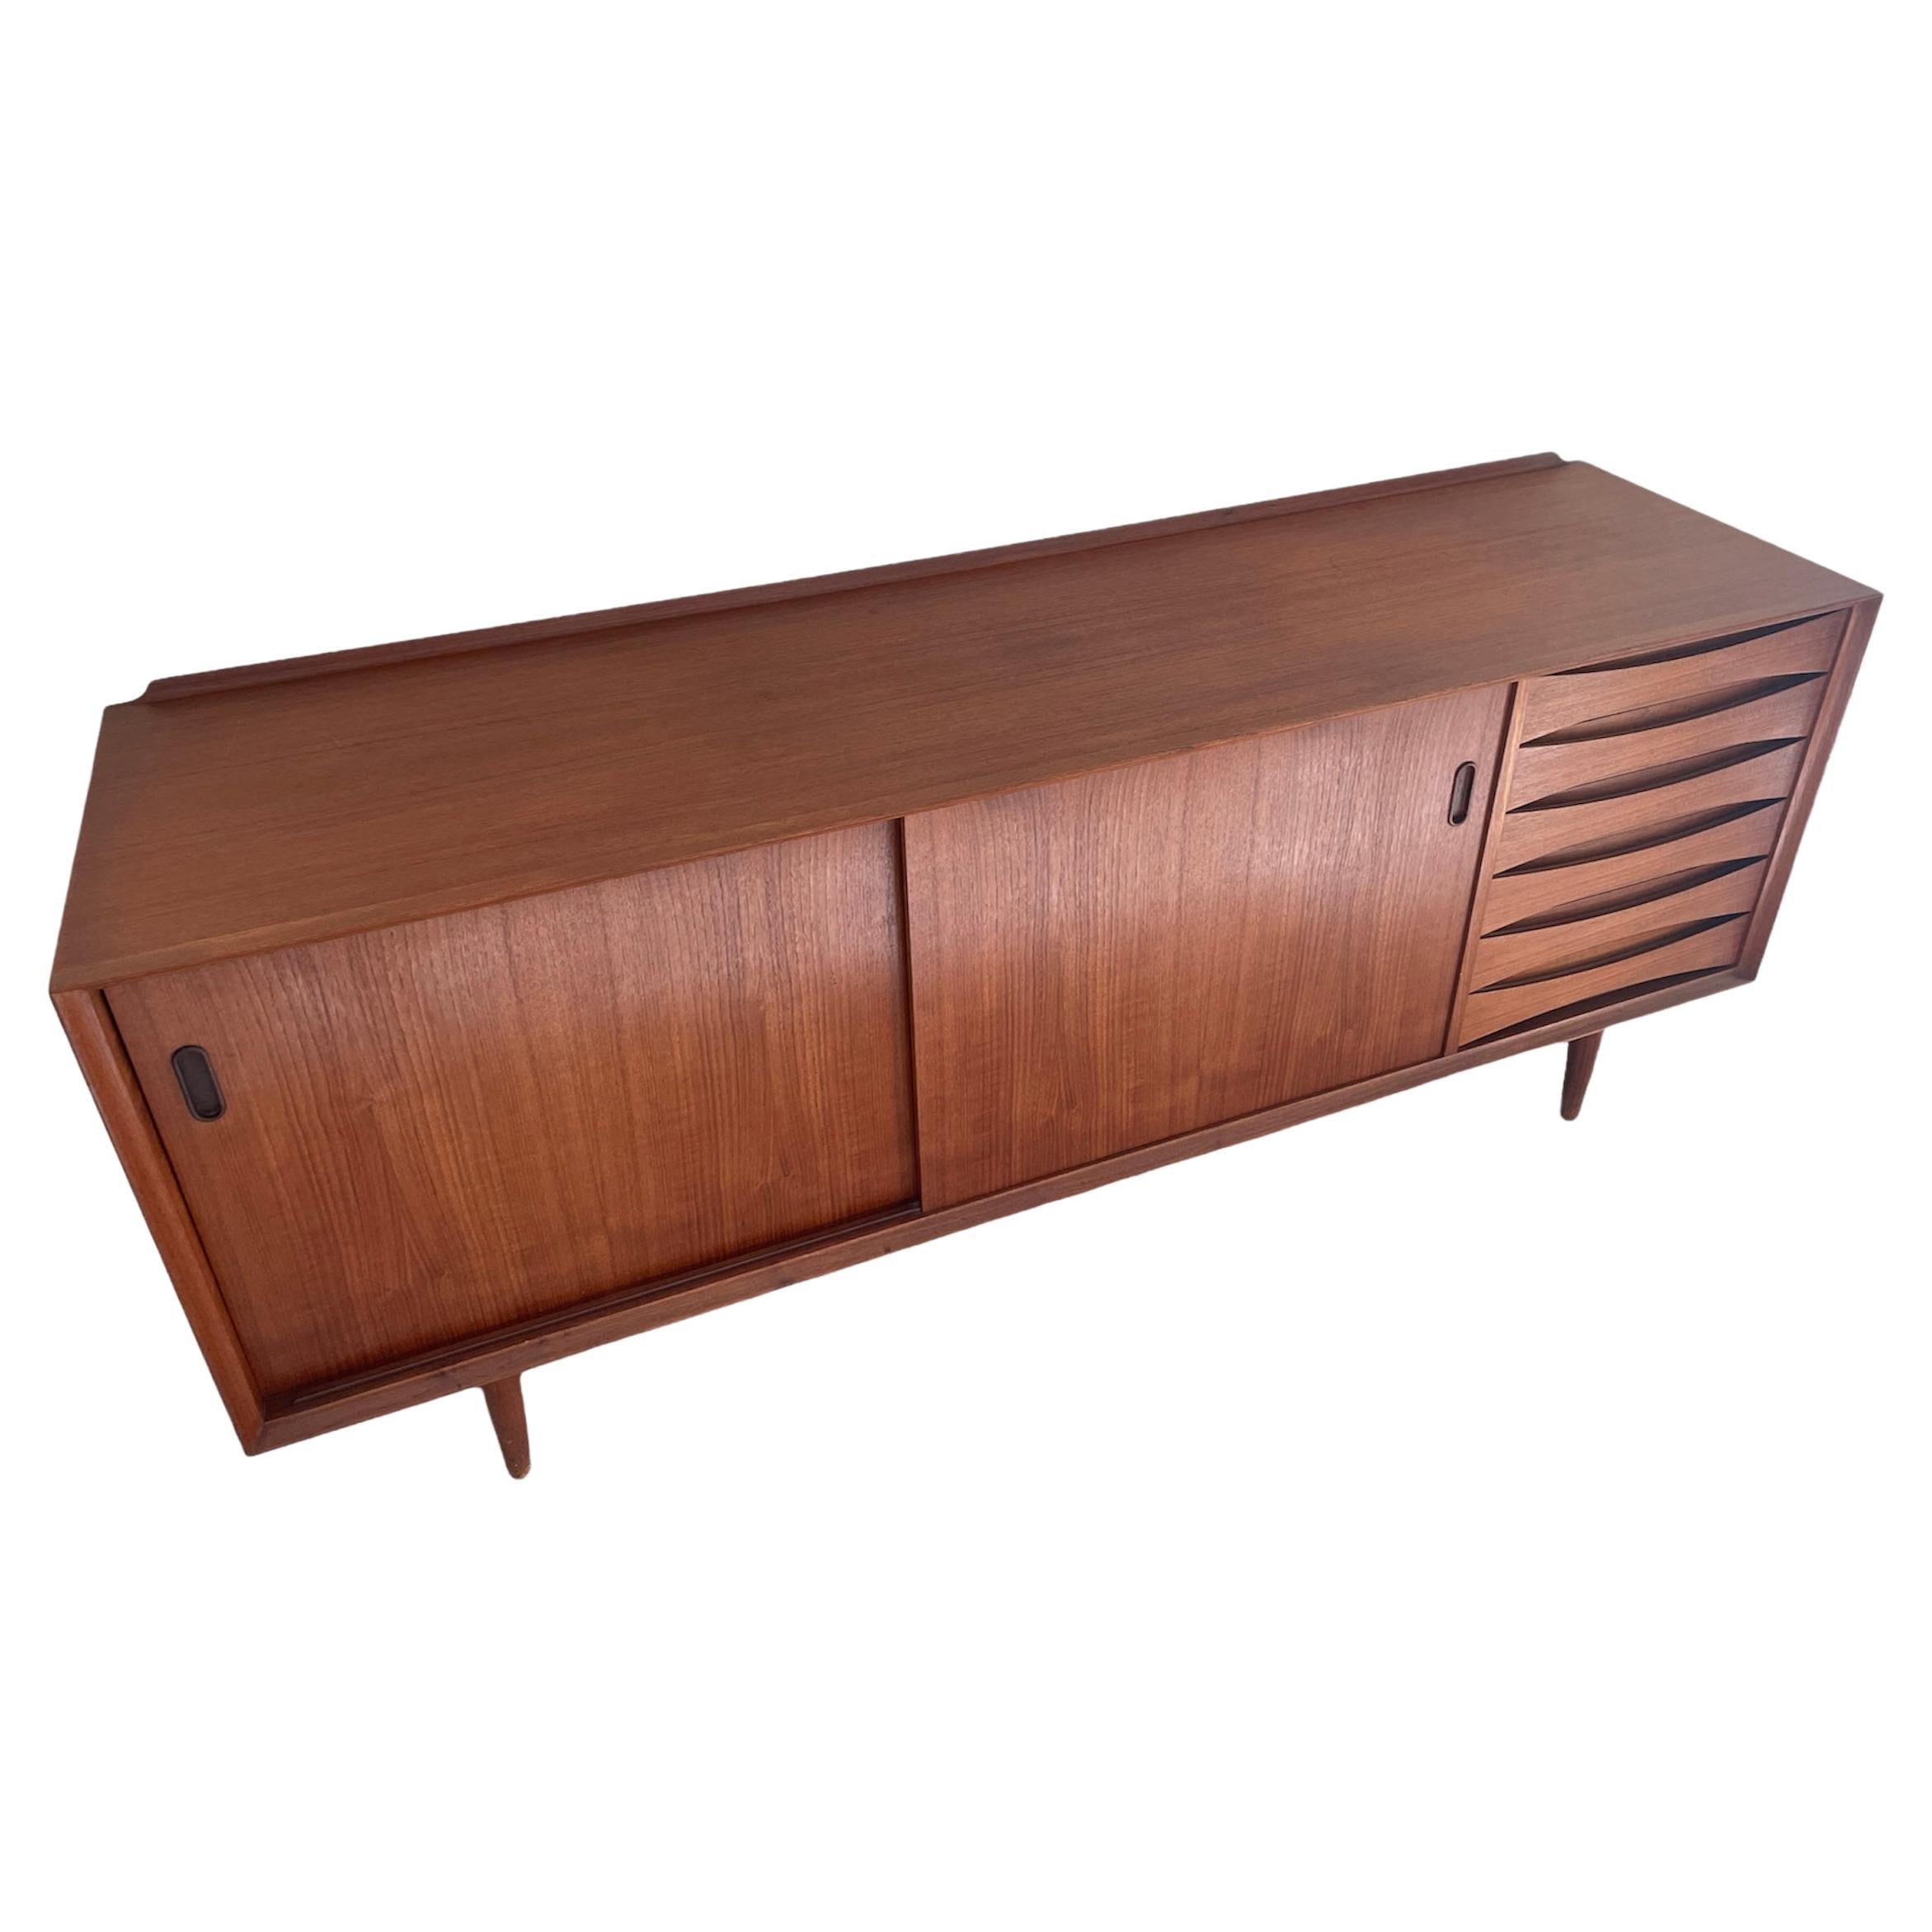 Stunning in every way!!!! 
This is the iconic credenza Model 21 designed by Arne Vodder for Sibast. 

The Model 21 sideboard has 6 drawers and 2 adjustable shelves behind 2 sliding doors. The beautiful bowtie front drawers are an amazing addition to